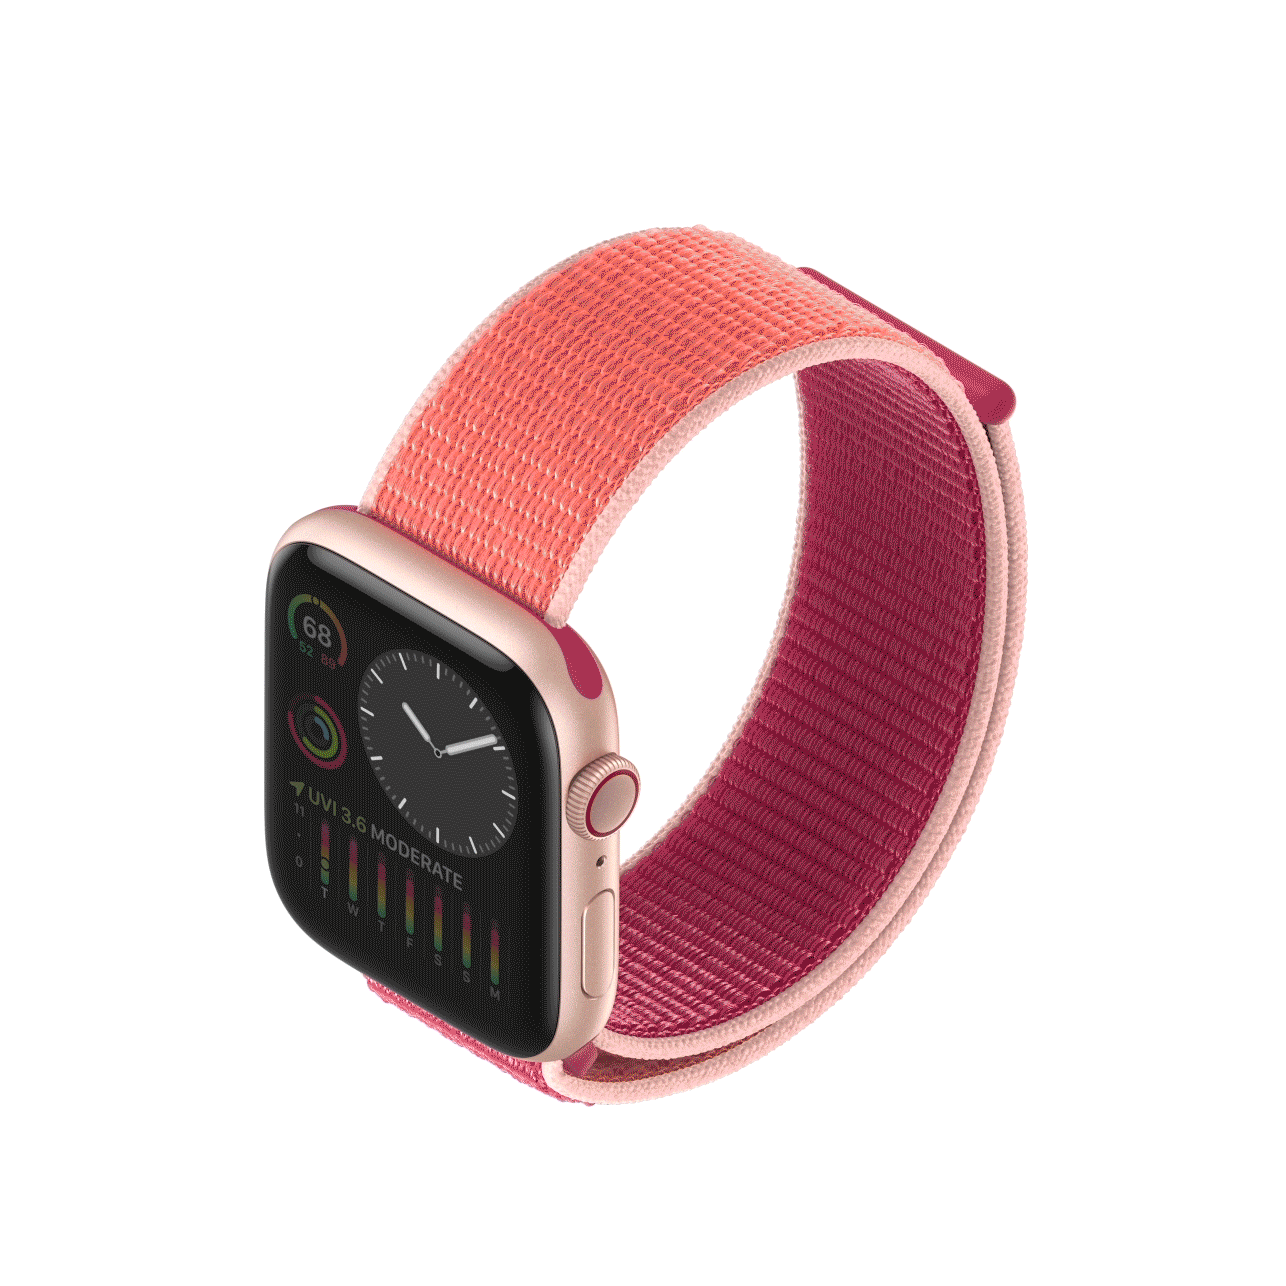 Apple_watch_series_5-screen-dims-and-brightens-with-wrist-motion-091019